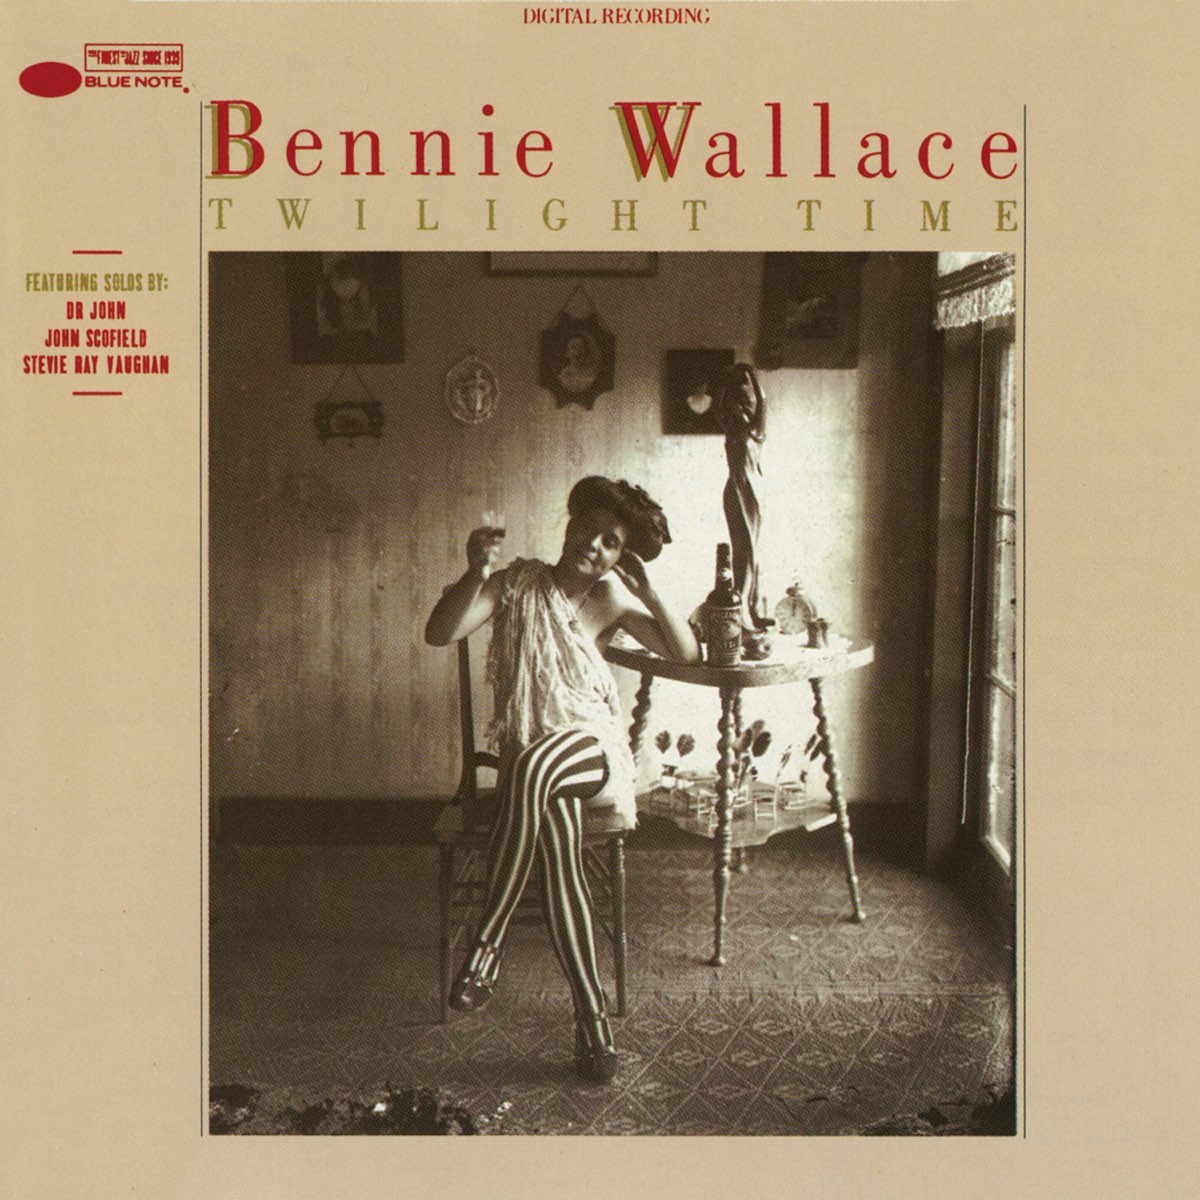 Time by Bennie Wallace on Music